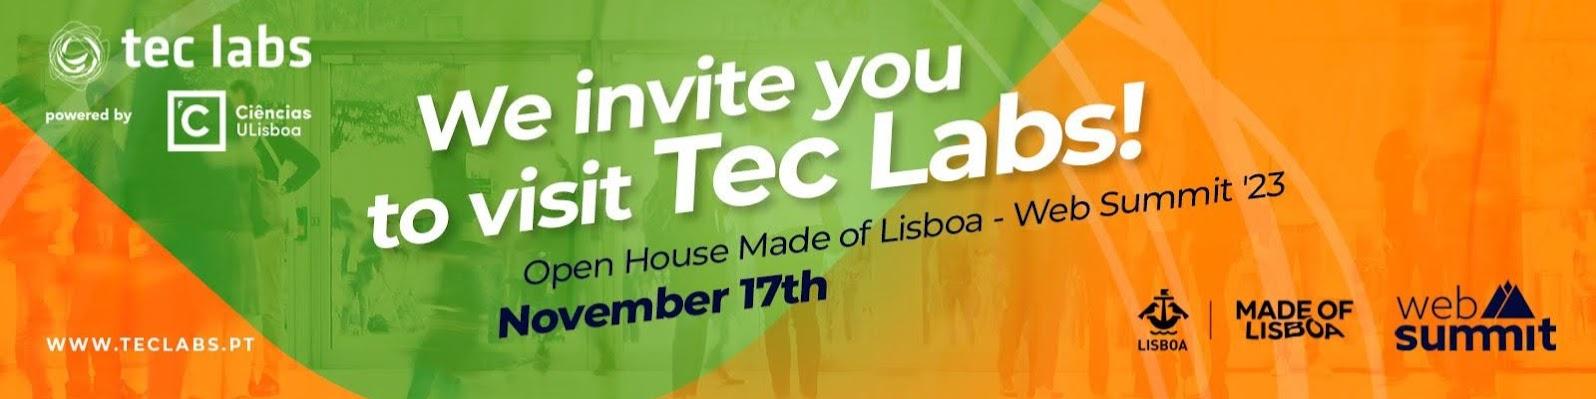 Open House Made of Lisboa at Tec Labs